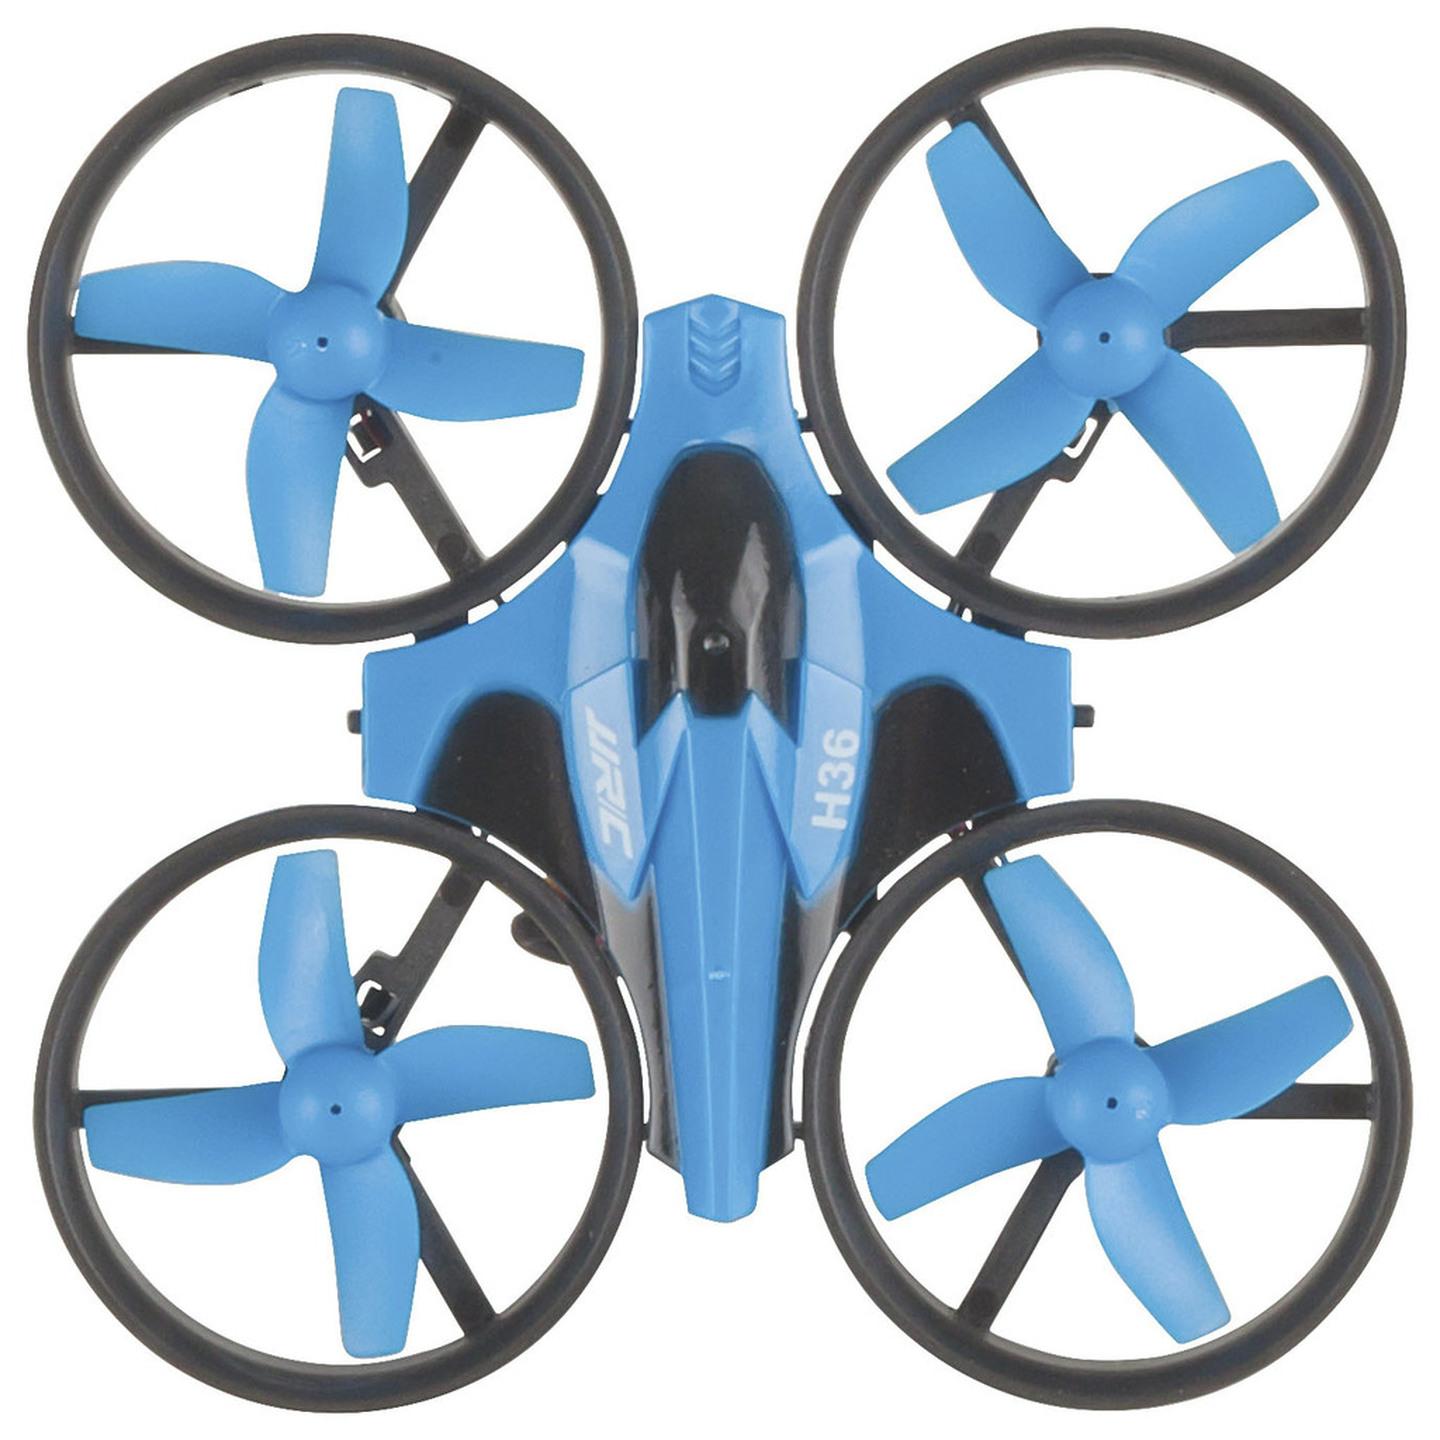 Mini Flipping Quadcopter 2.4GHz